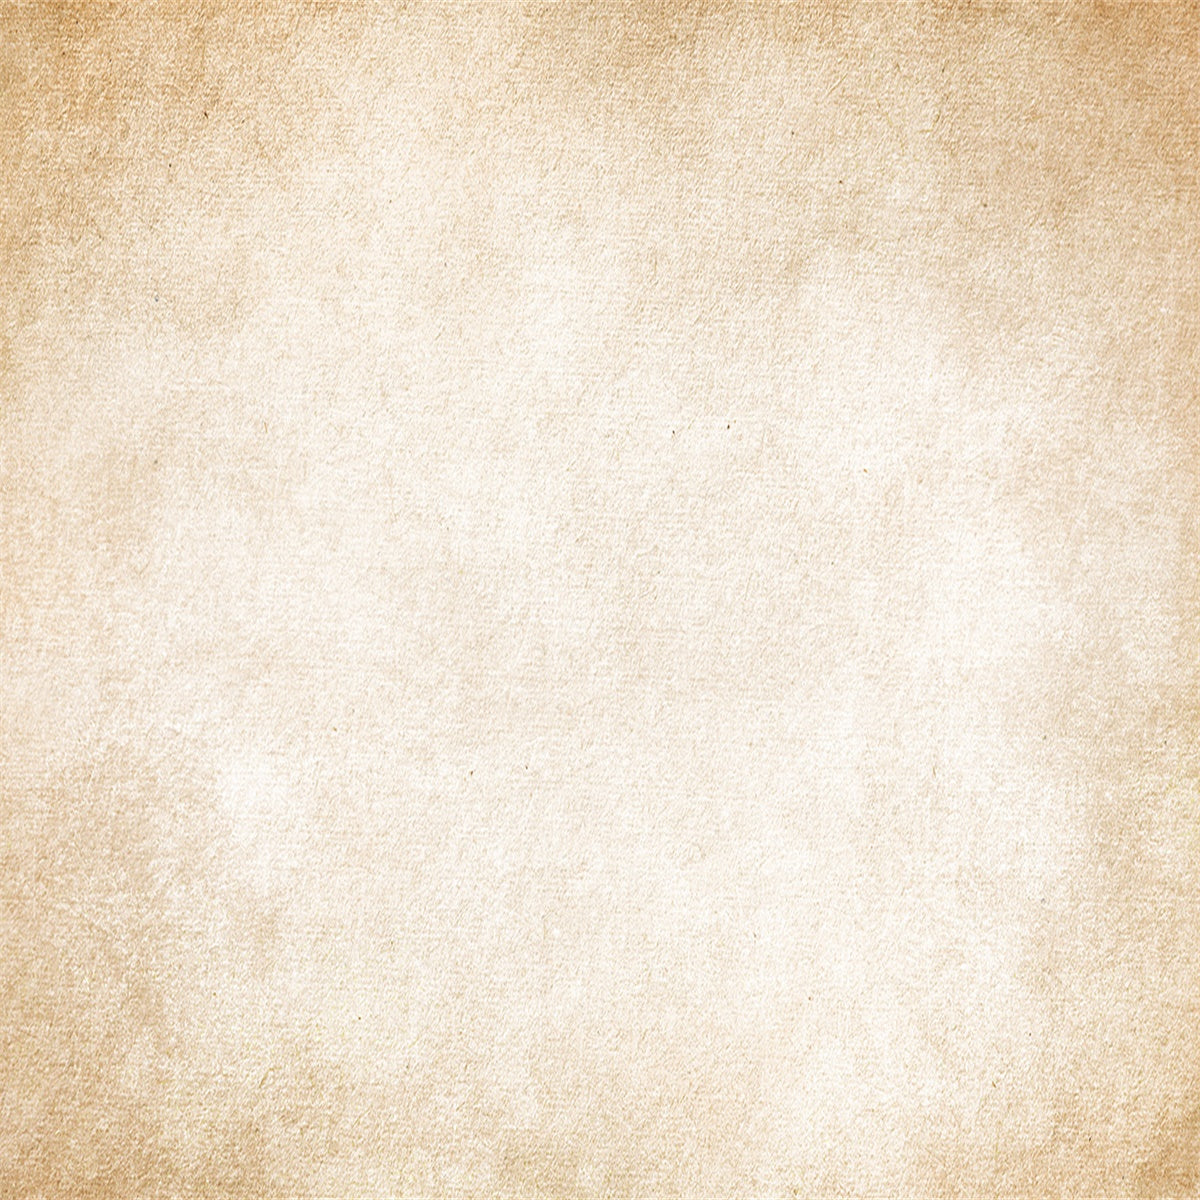 Abstract Beige Wall Photography Backdrops for Picture